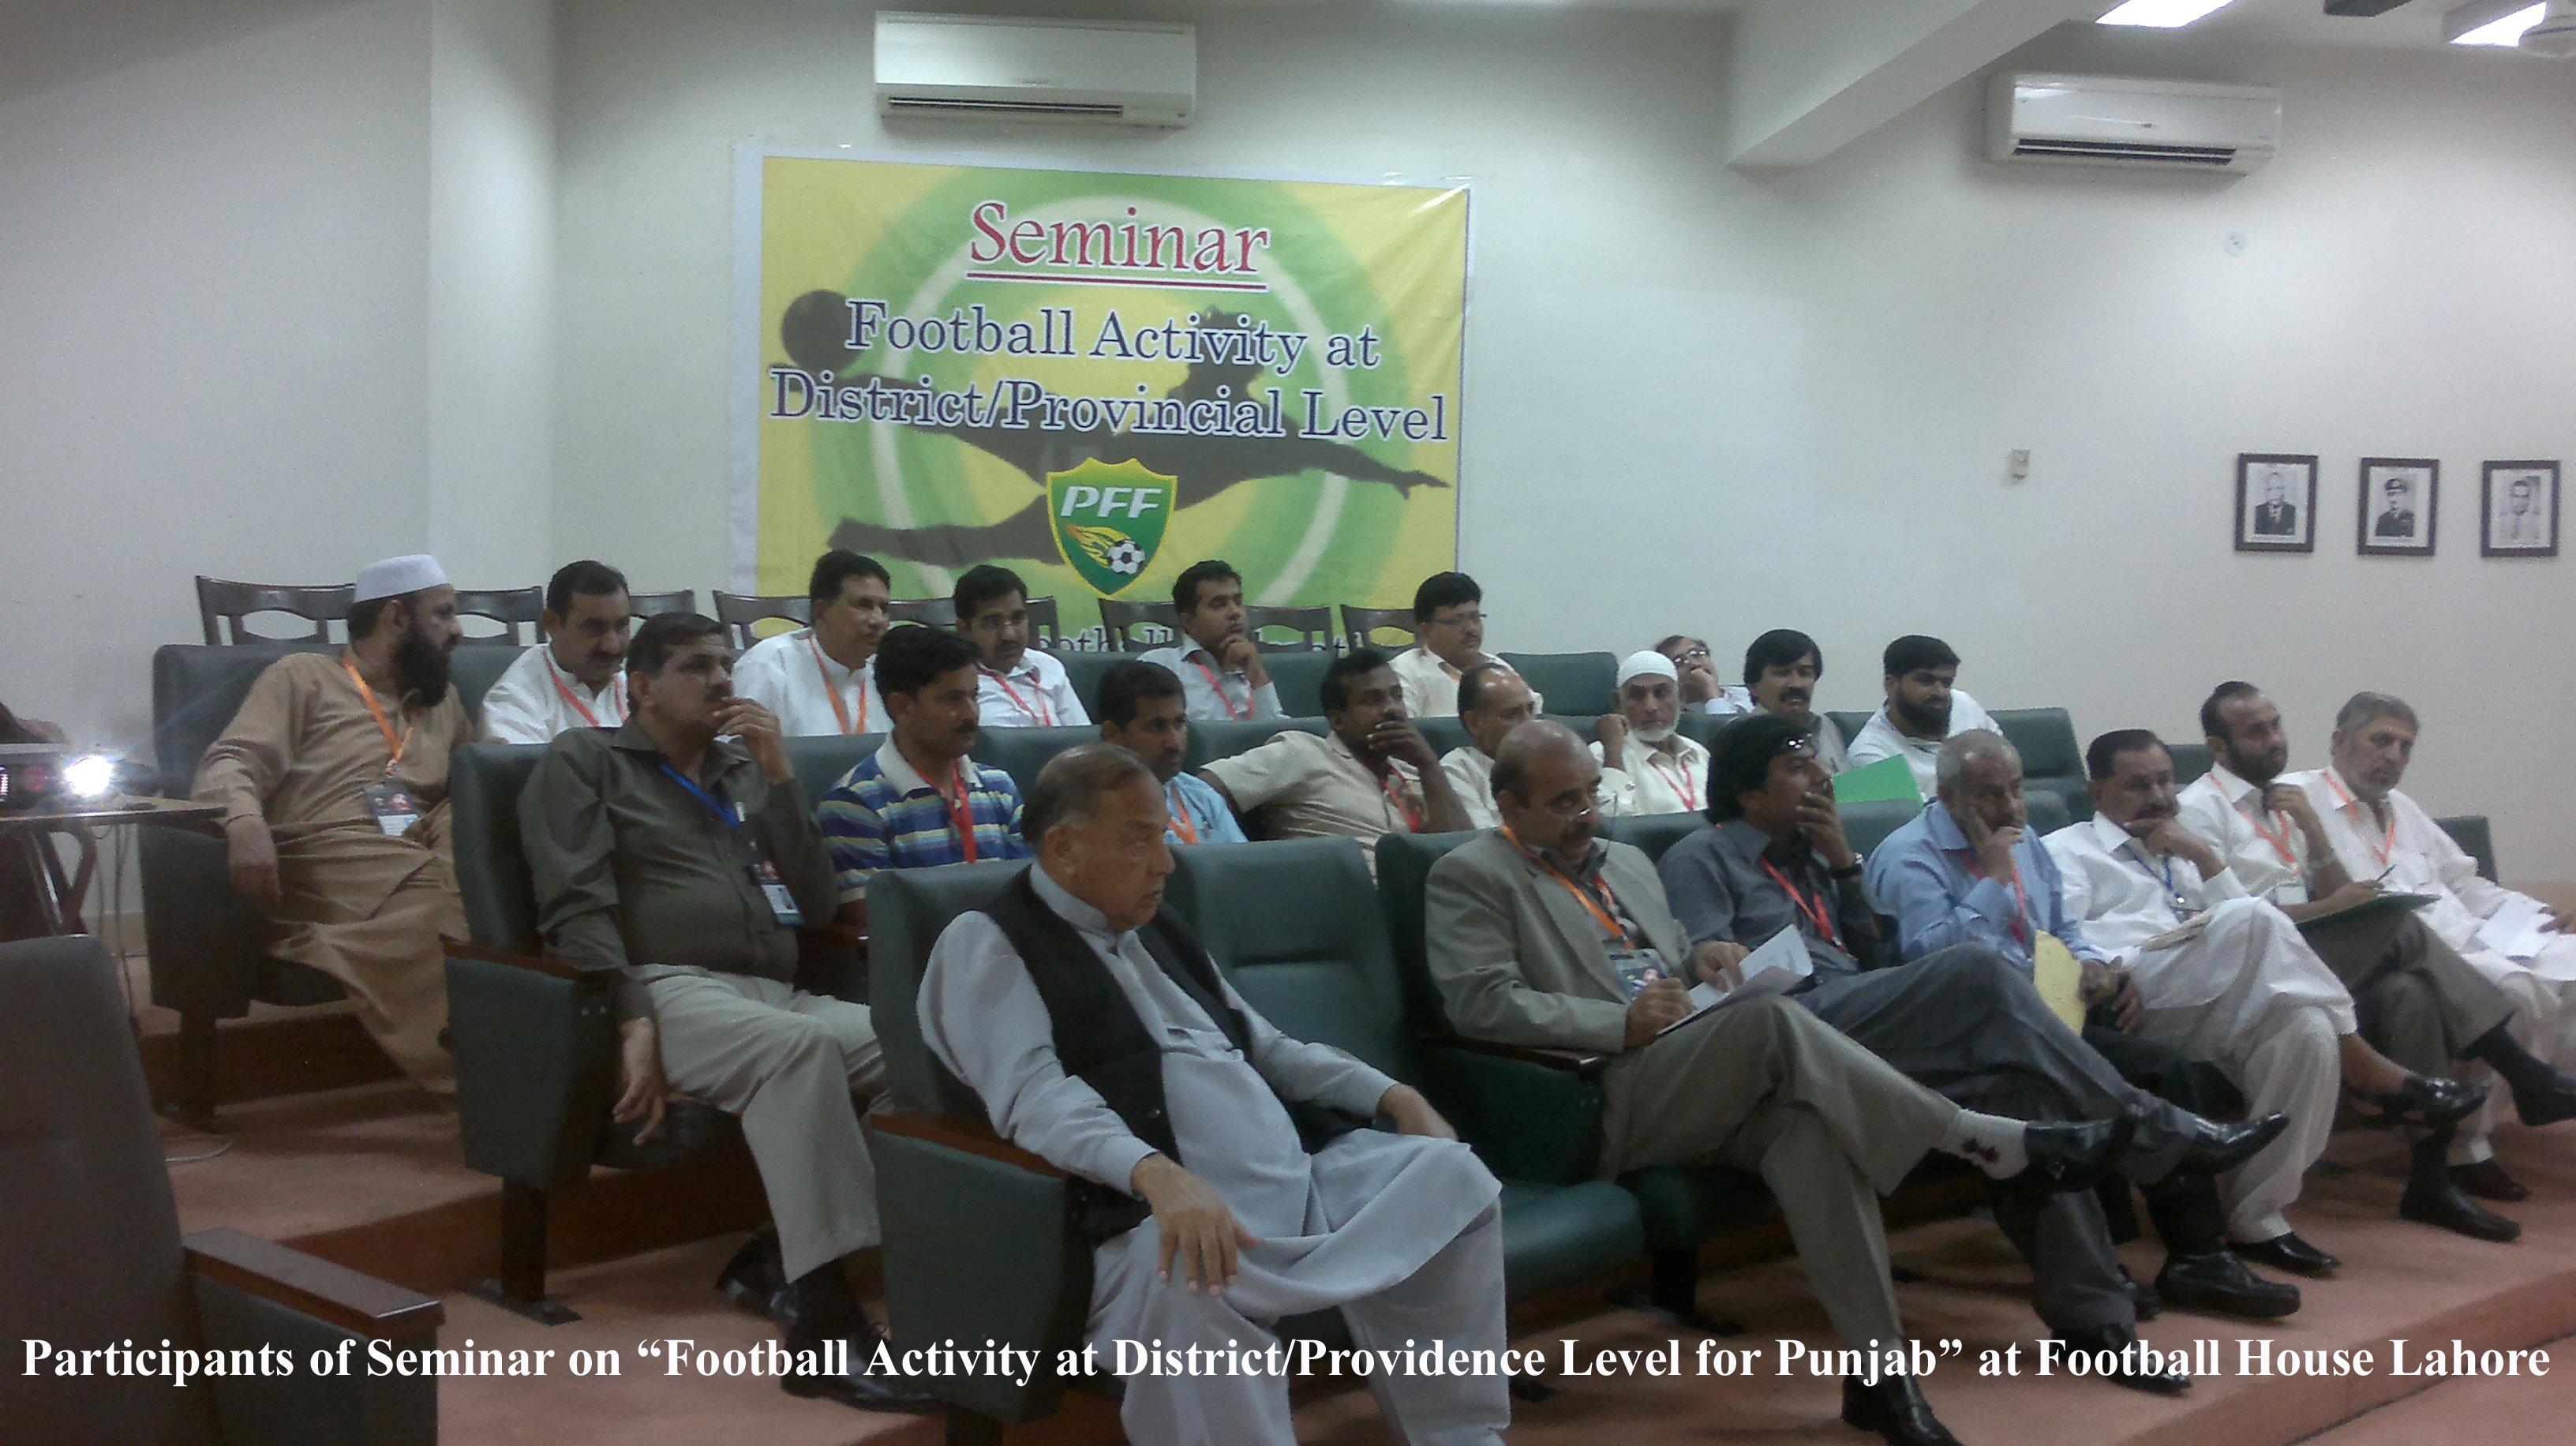 Seminar of Football activity at district province level approved